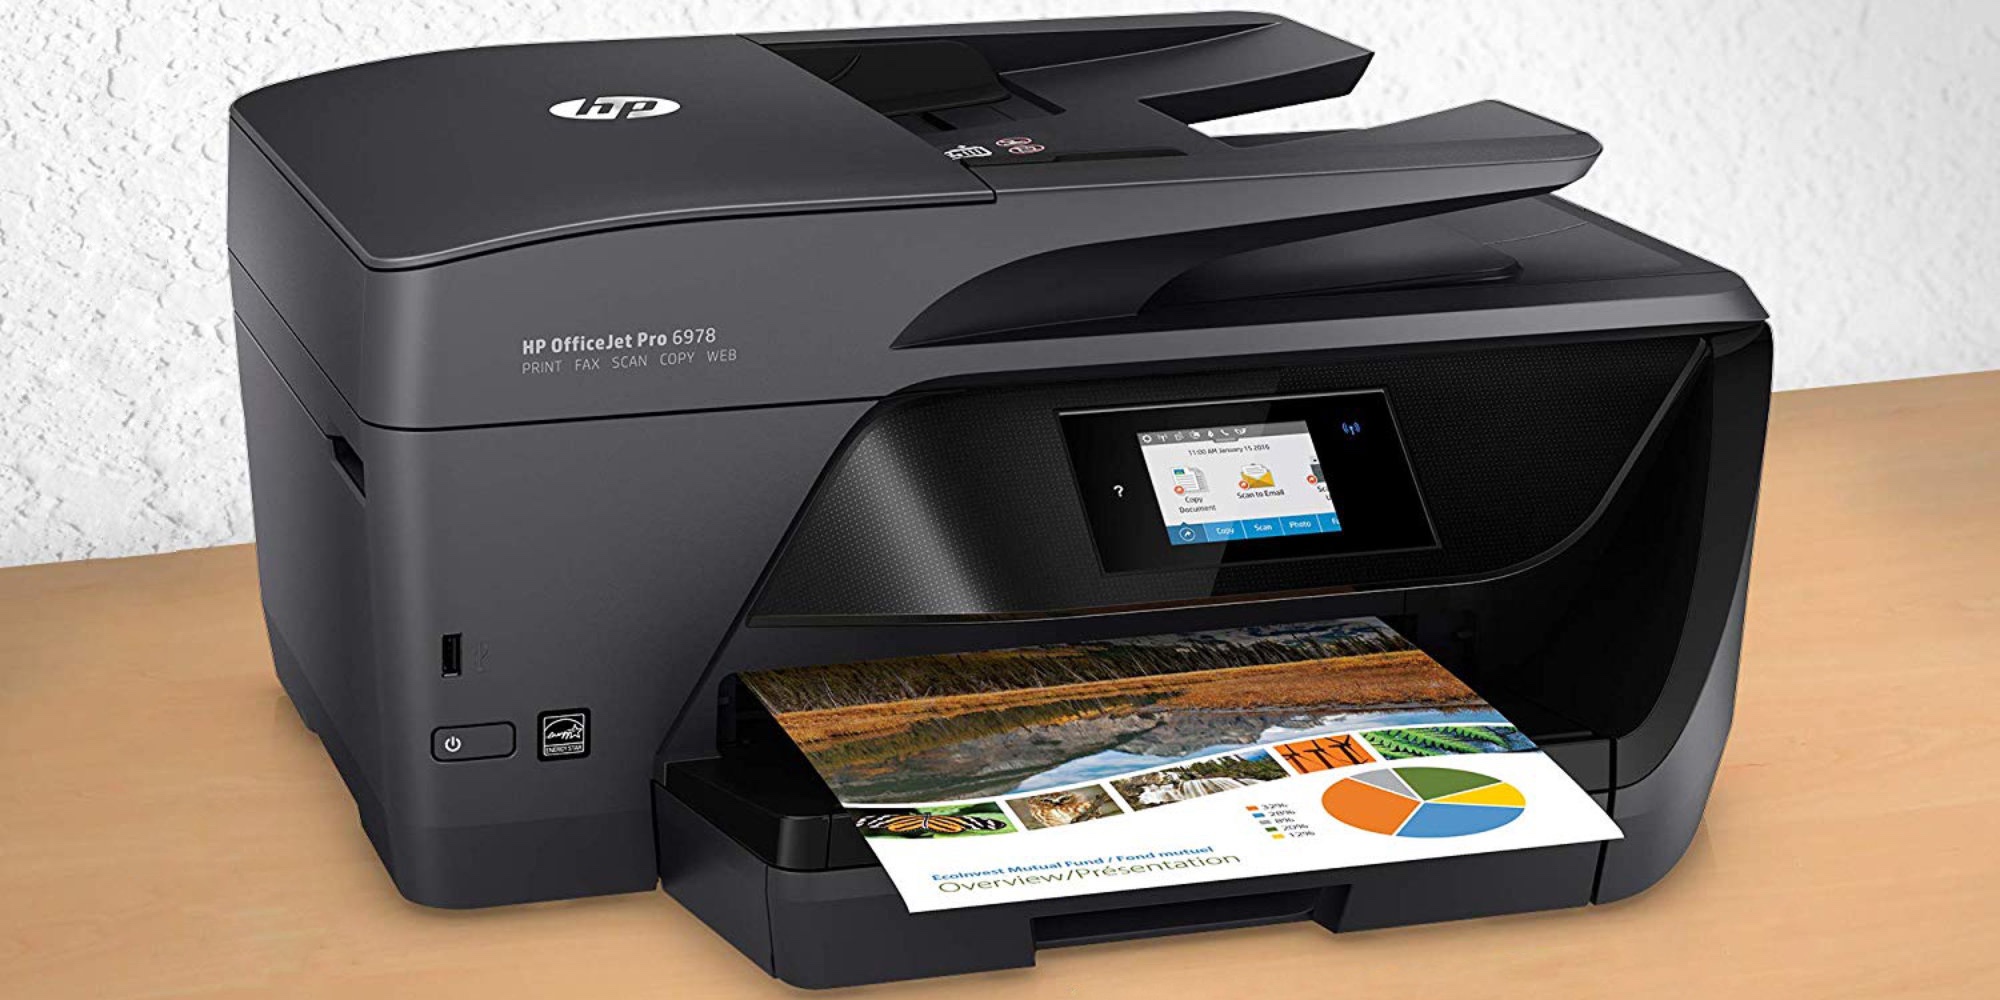 hp officejet pro 8600 driver for mac catalina